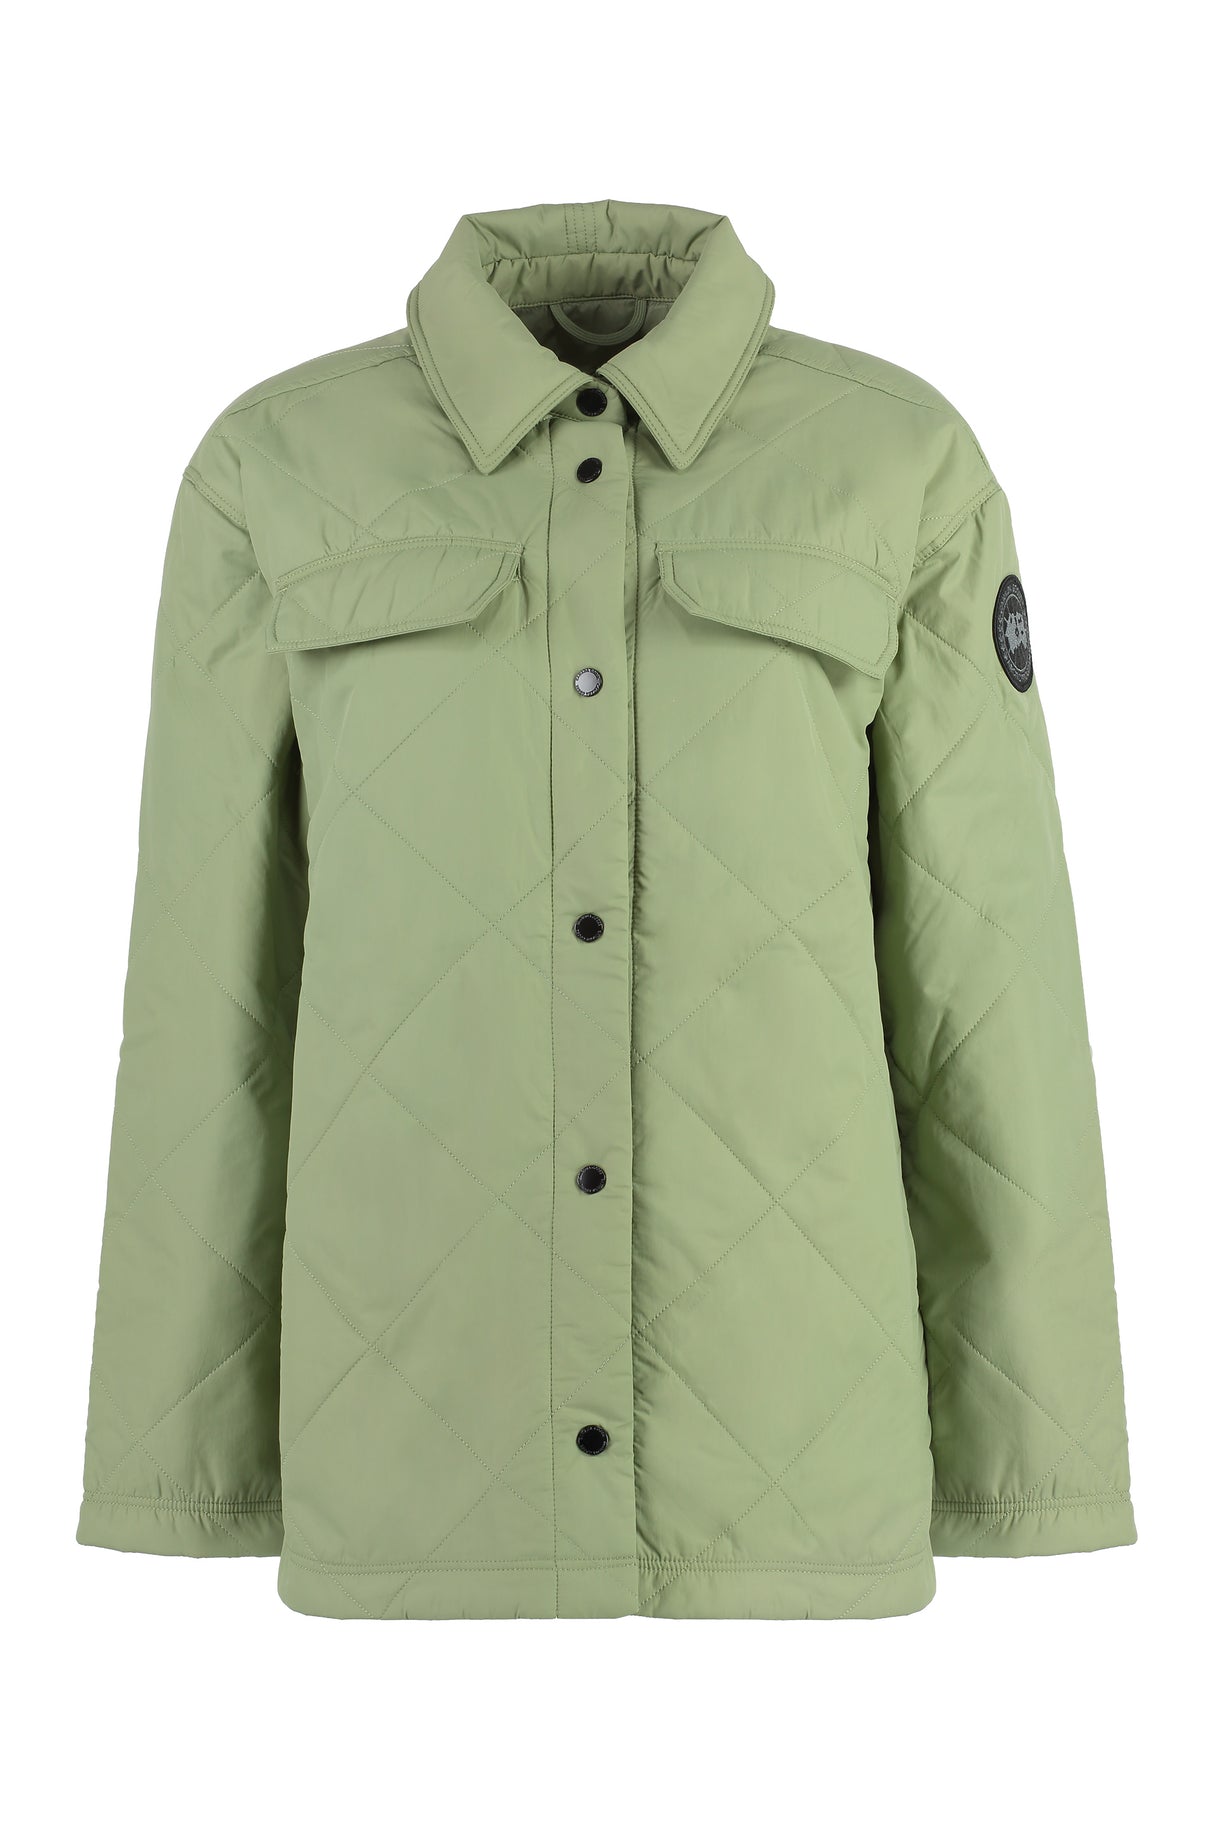 CANADA GOOSE Quilted Overshirt for Women in Green - FW23 Collection